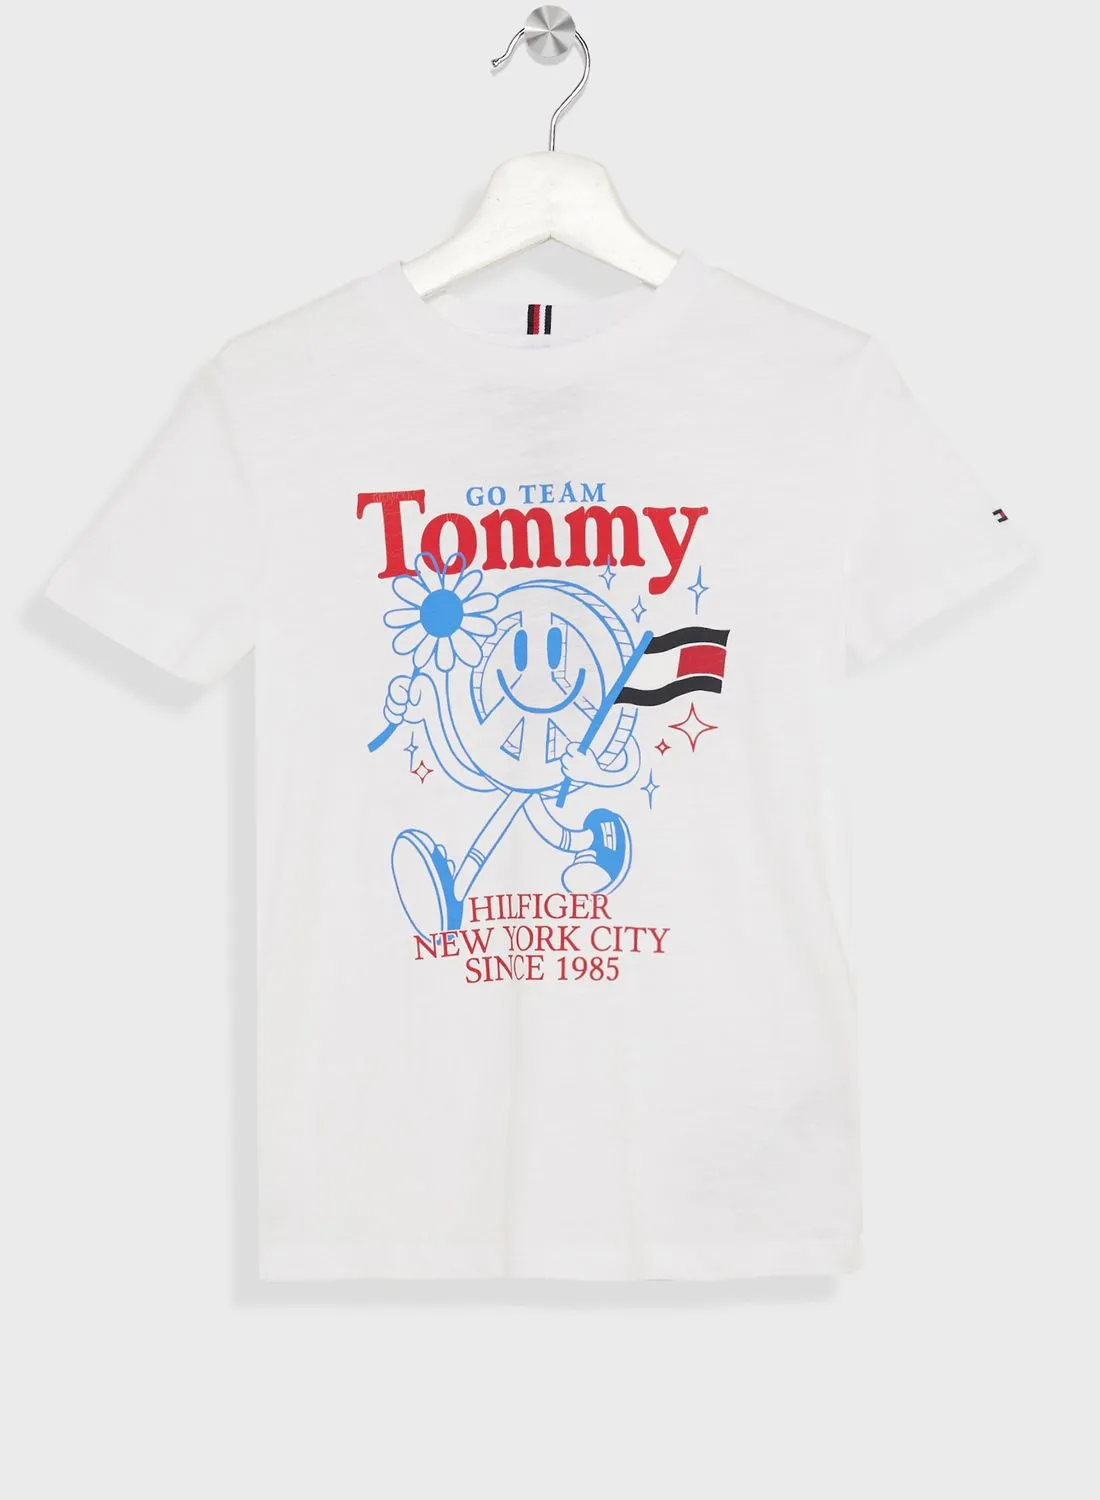 TOMMY HILFIGER Youth Printed T-Shirt